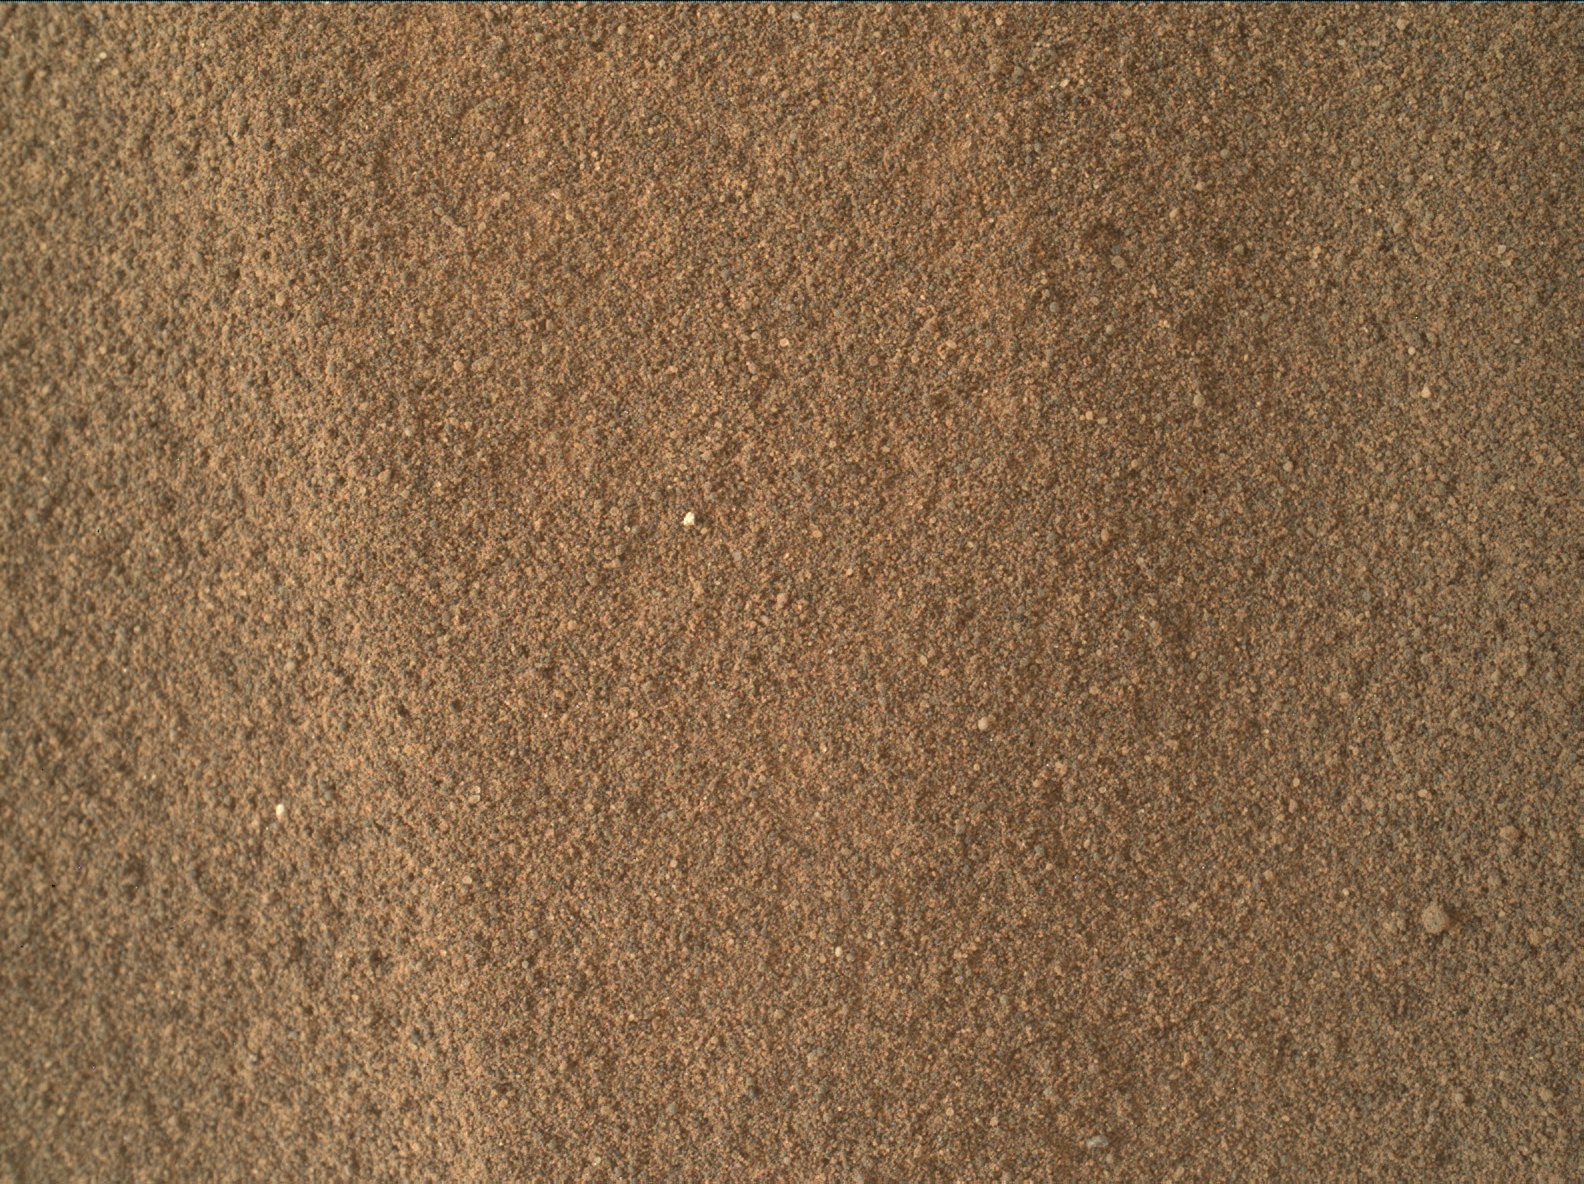 Nasa's Mars rover Curiosity acquired this image using its Mars Hand Lens Imager (MAHLI) on Sol 2731